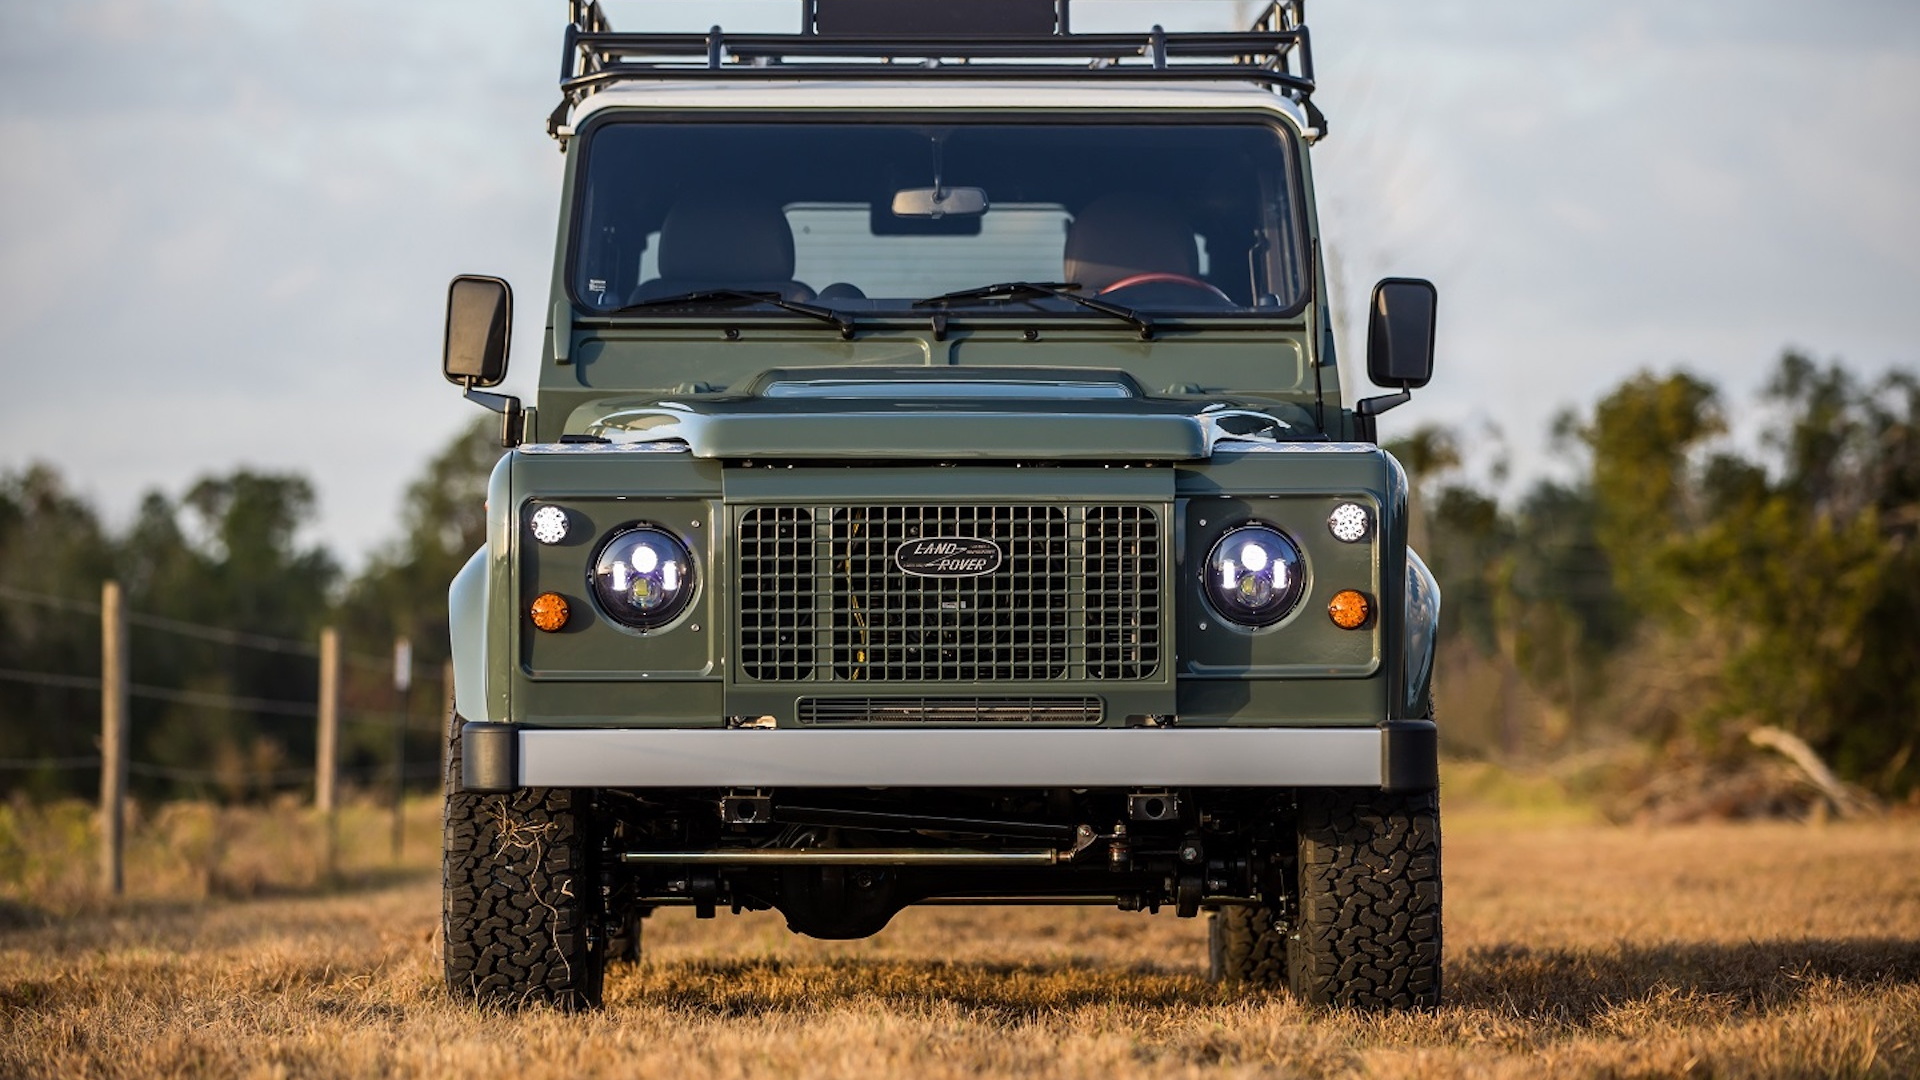 Project Tuki by East Coast Defender